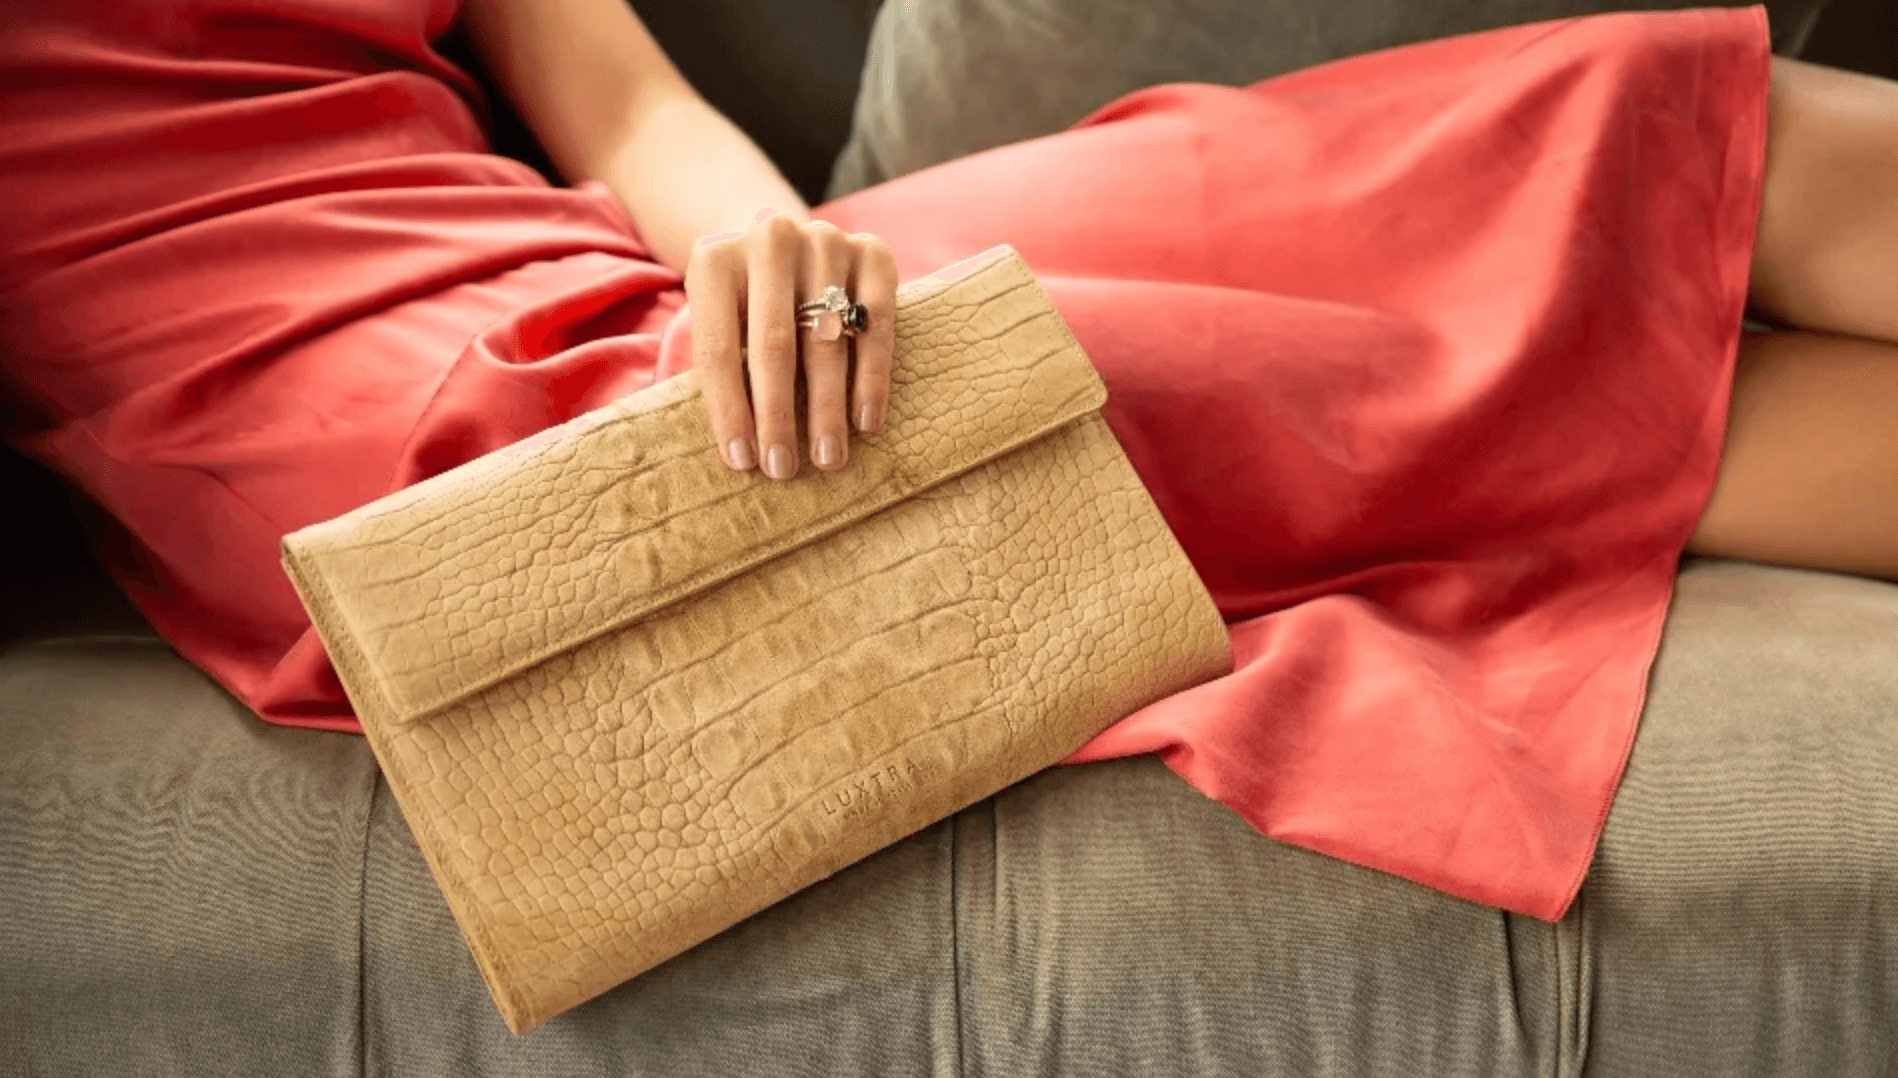 New Designer Vegan Leather Handbags Are Made From Mangoes